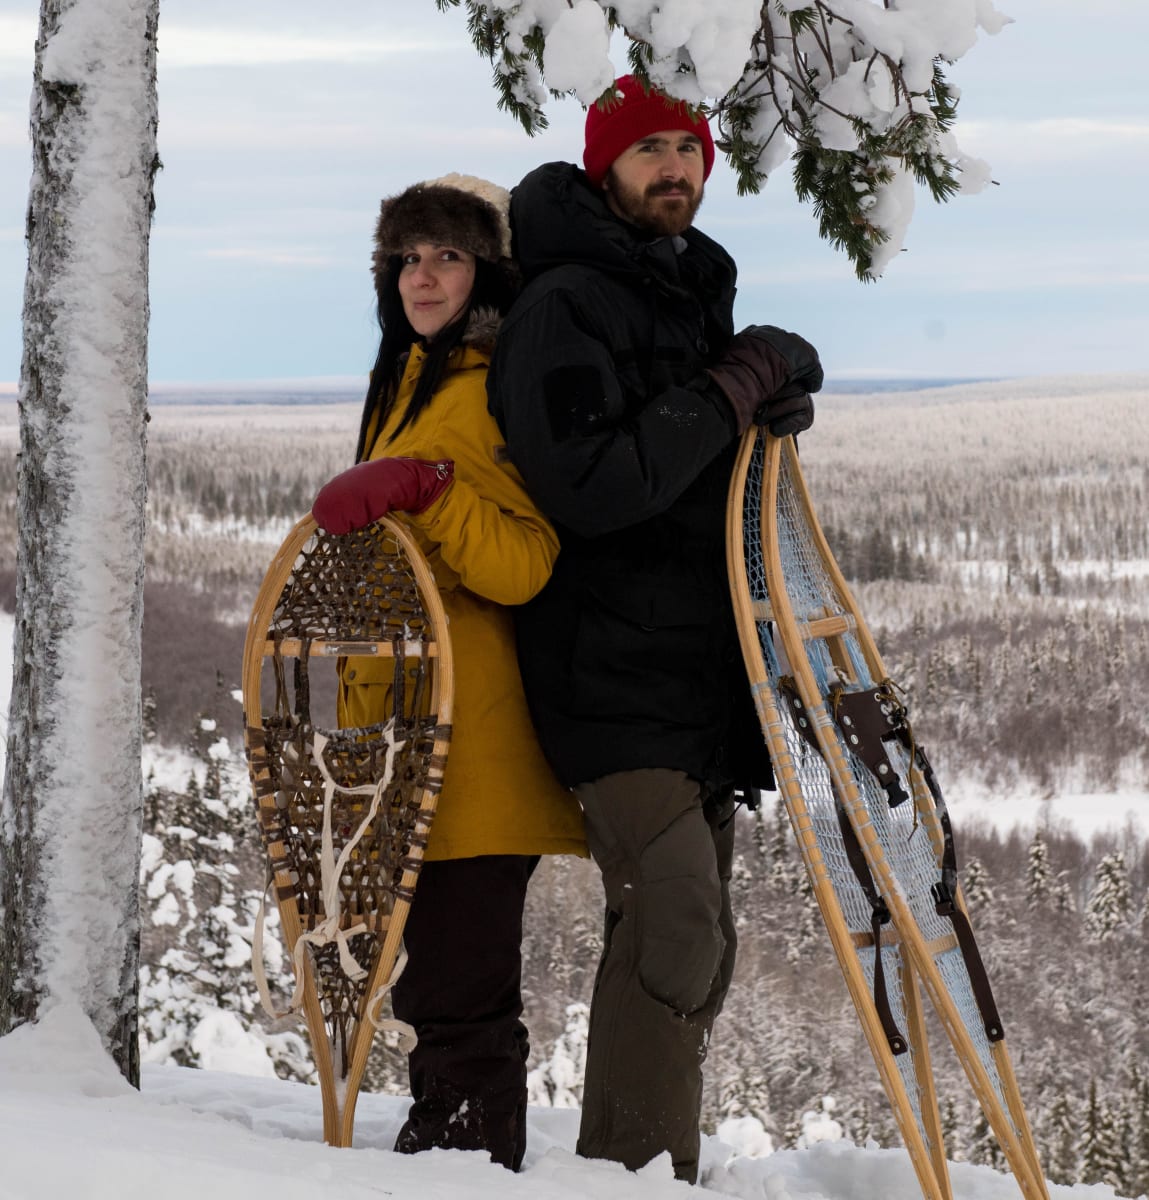 An Excursion on Traditional Wooden Snowshoes